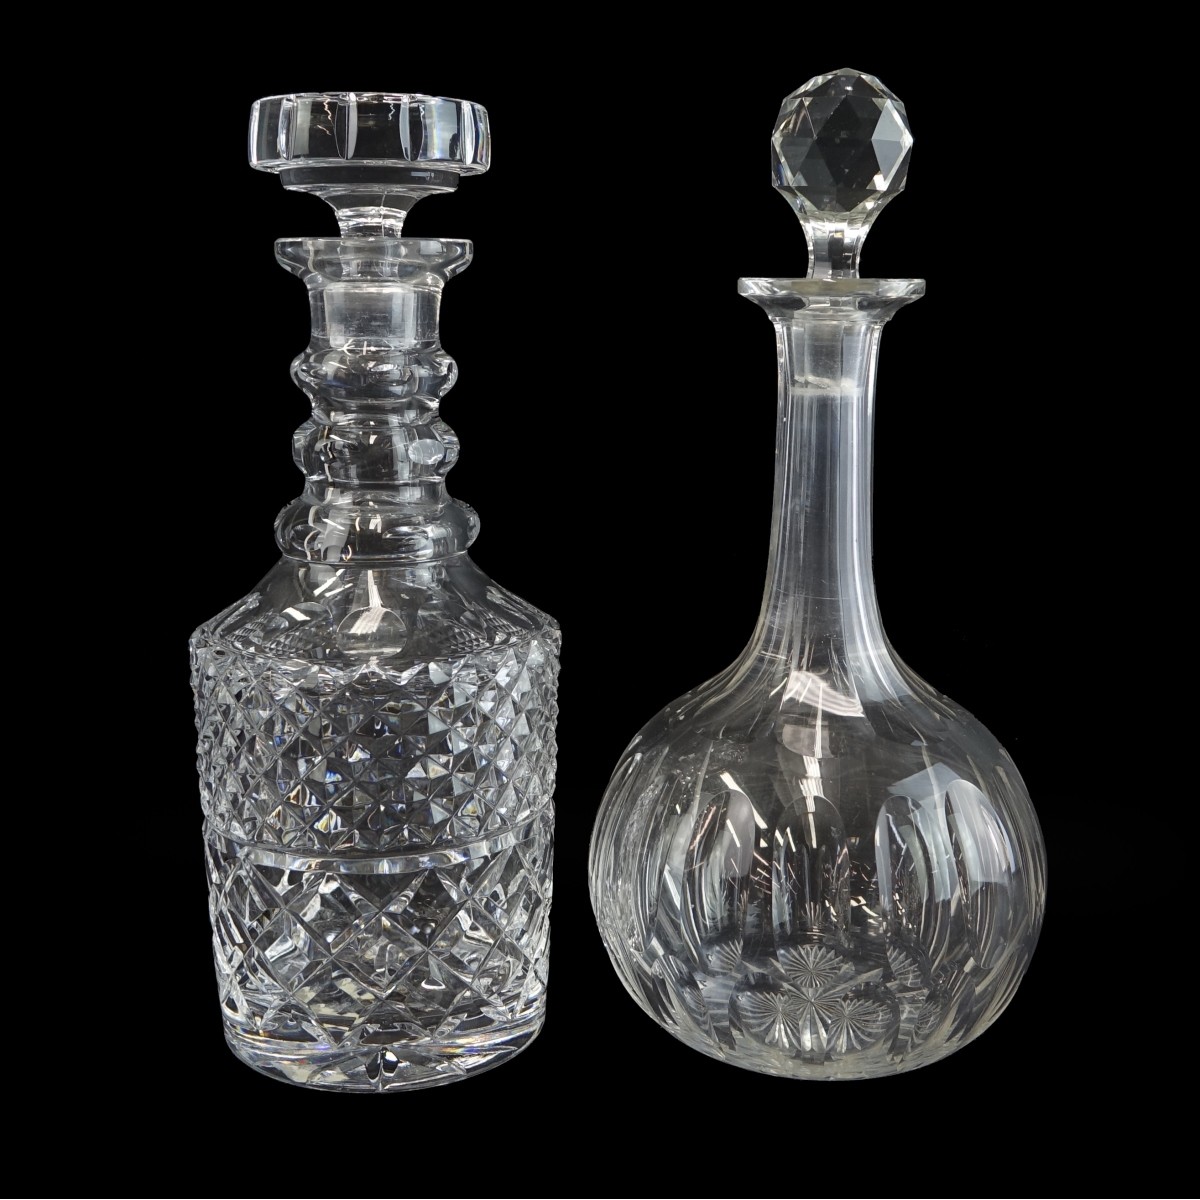 Two (2) Vintage Cut Crystal Decanters